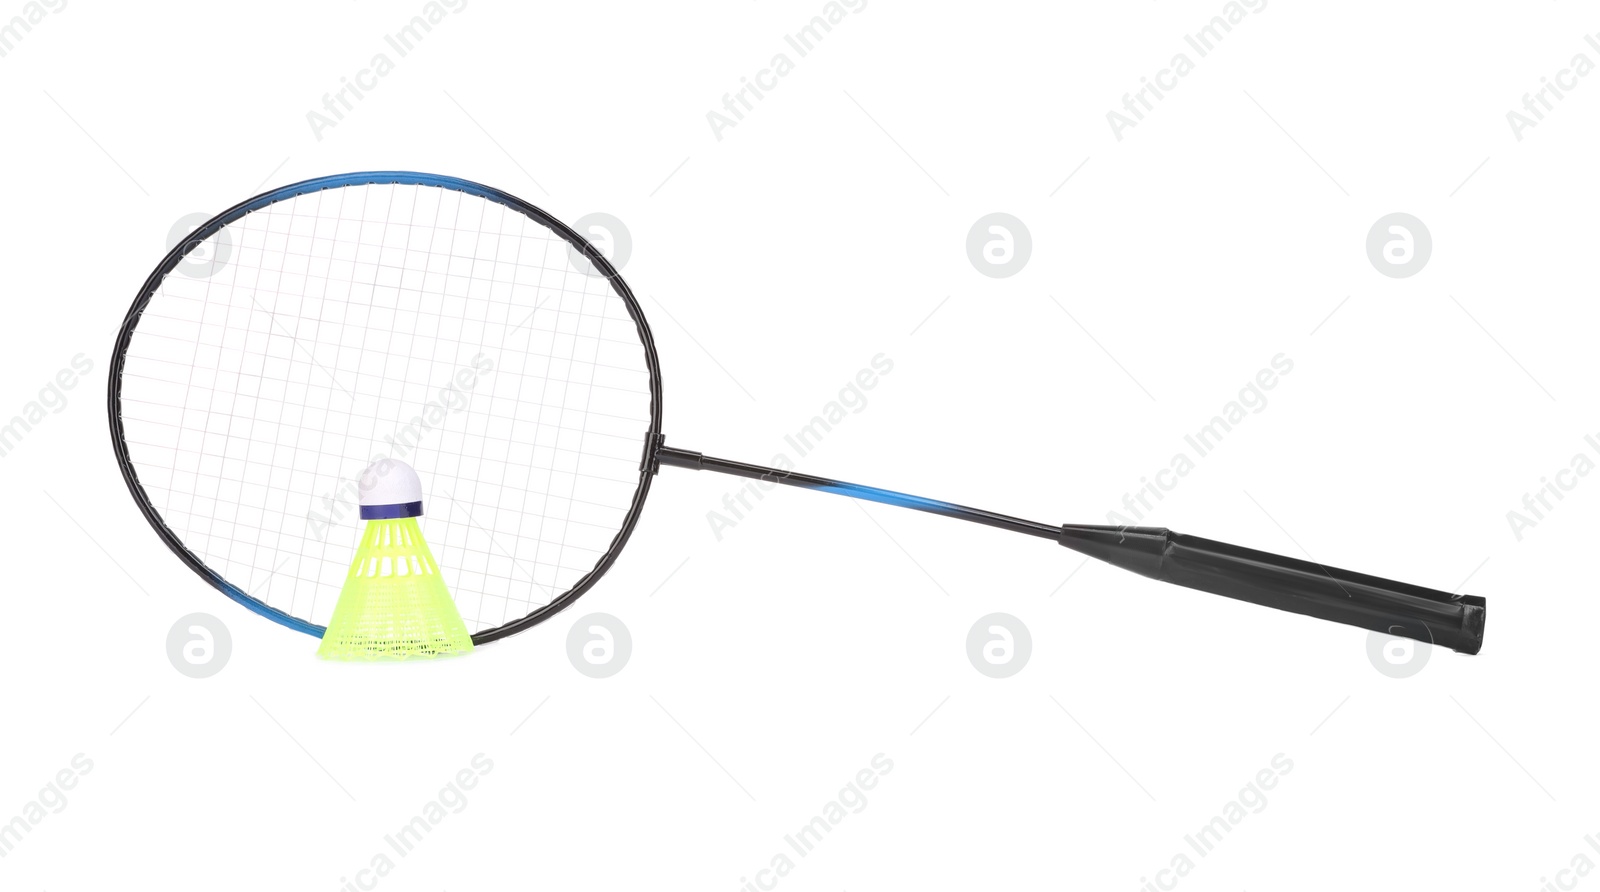 Photo of Badminton shuttlecock and racket isolated on white. Sports equipment